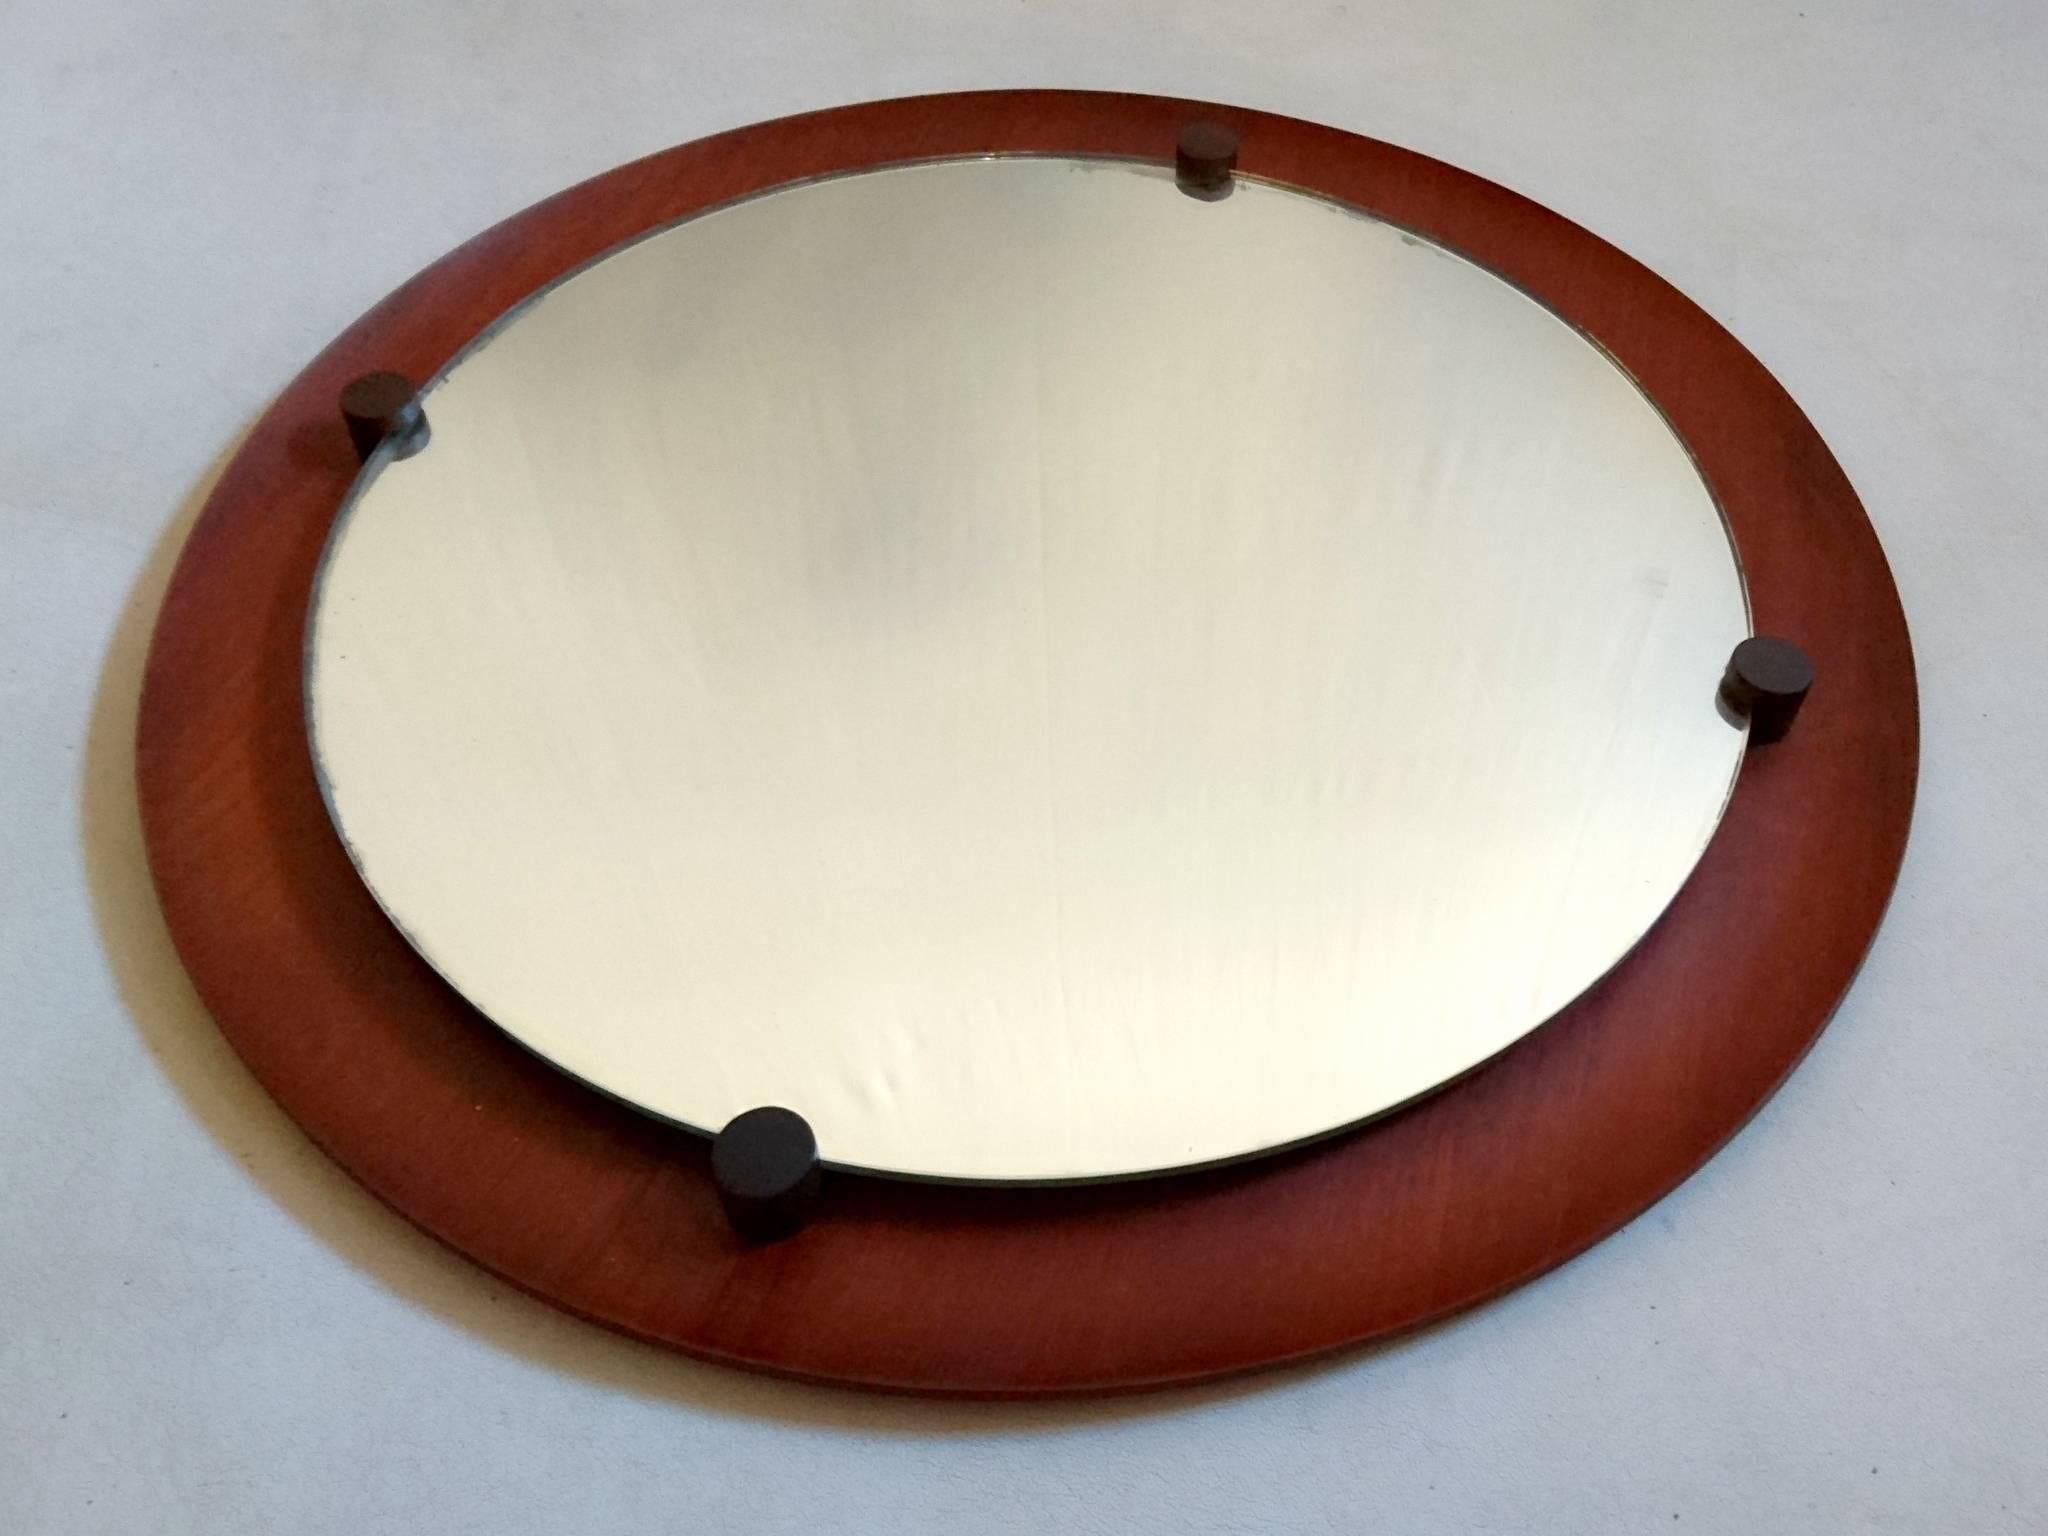 A large round teak frame raised mirror with rosewood pegs by Franco Campo & Carlo Graffi. Very nice condition.